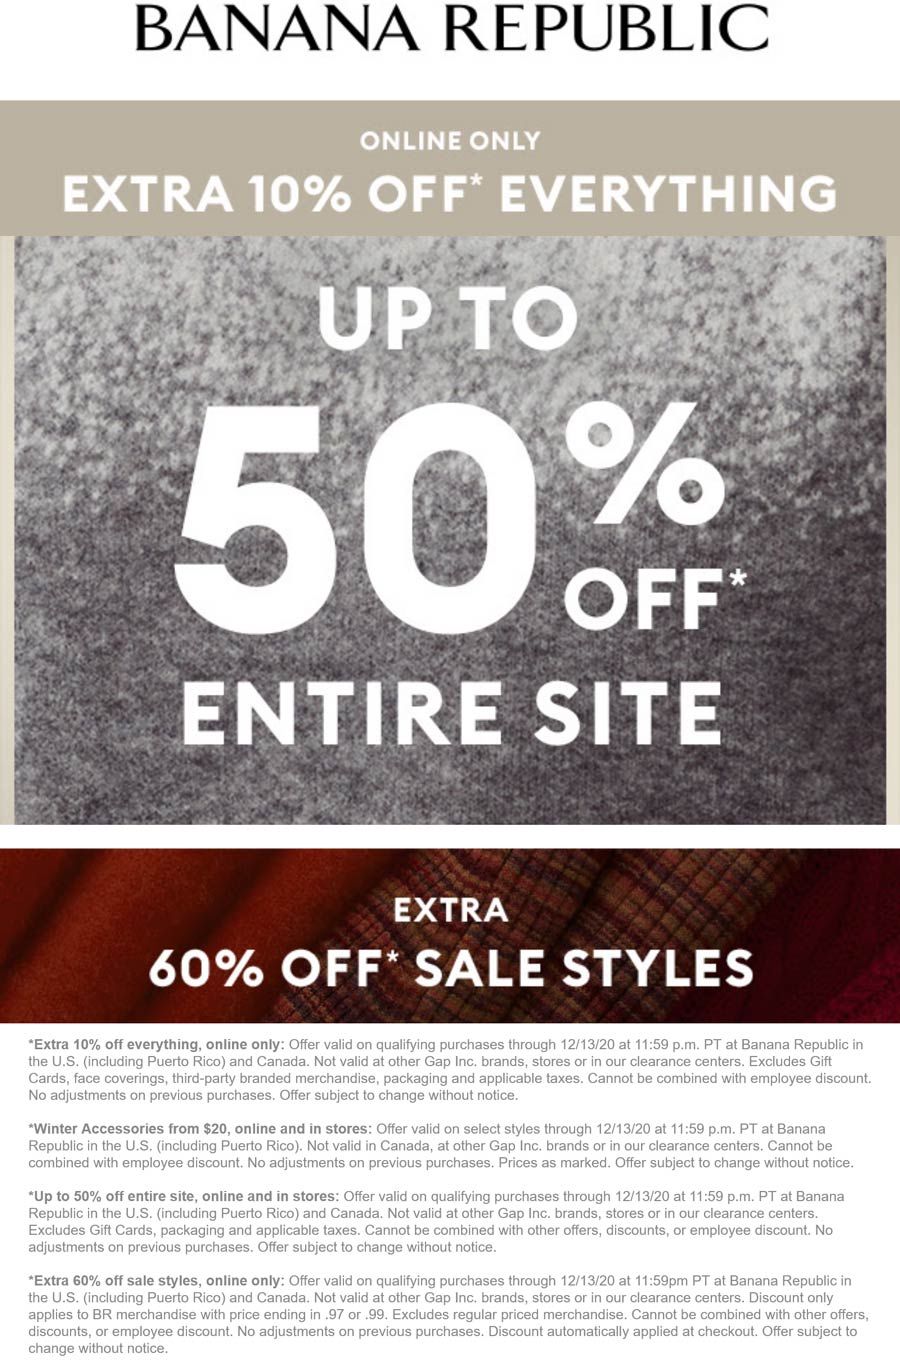 Extra 60 off sale items & more today online at Banana Republic 